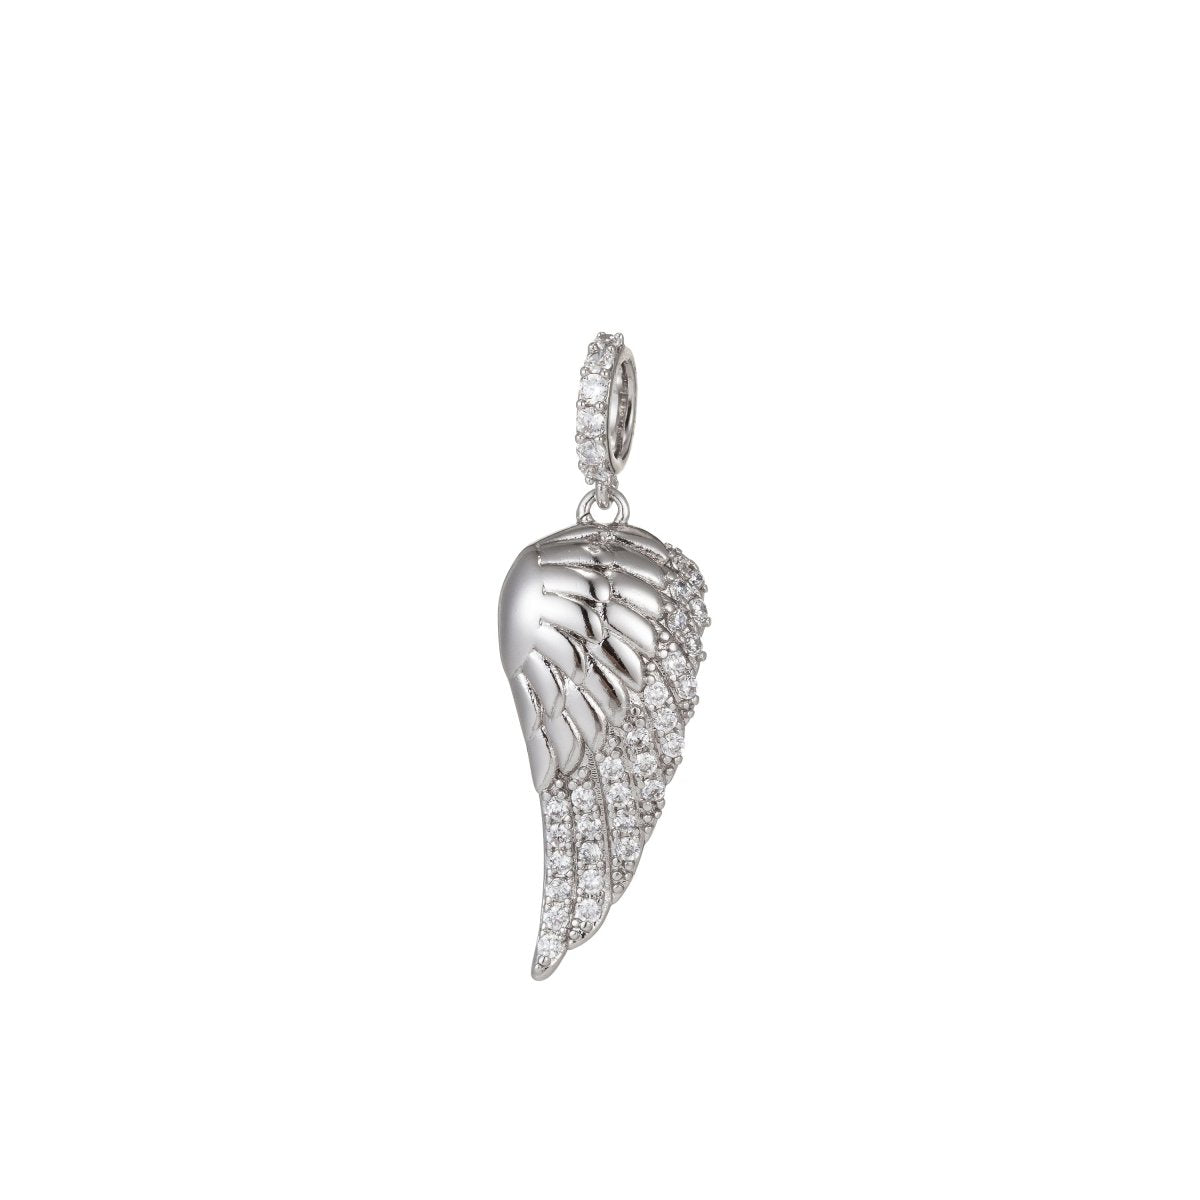 White Gold Filled Micro Pave CZ Angel Wing Pendant Charm, Micro Pave CZ Wing Pendant Charm, White Gold Filled Pendant, For DIY Jewelry I-386 I-513 - DLUXCA